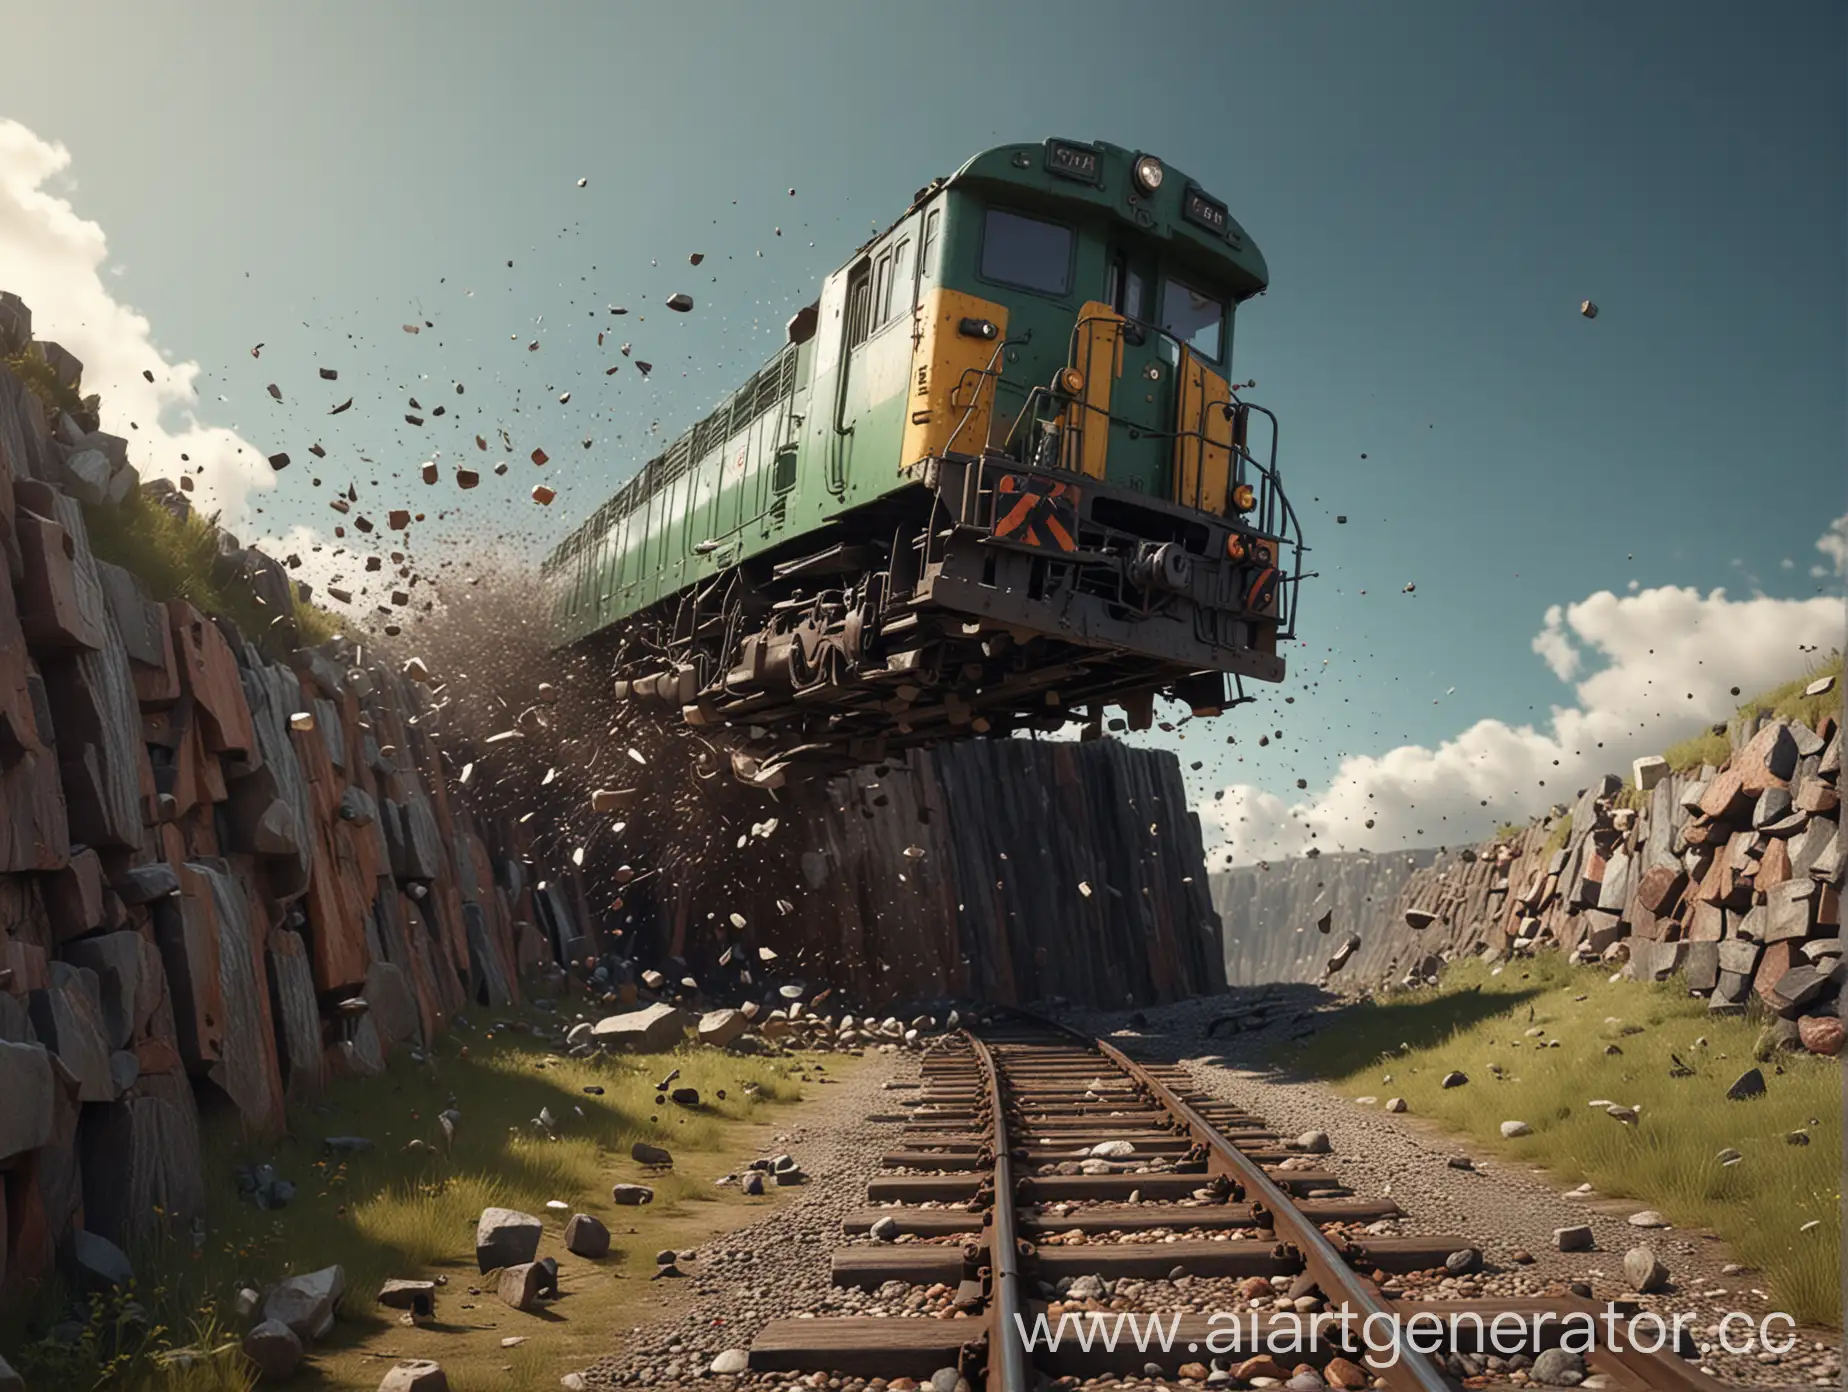 generate a 3d a train falling down into pound. use the renderman nderer.3d. digital art. high definition, high contrast, high color saturation.